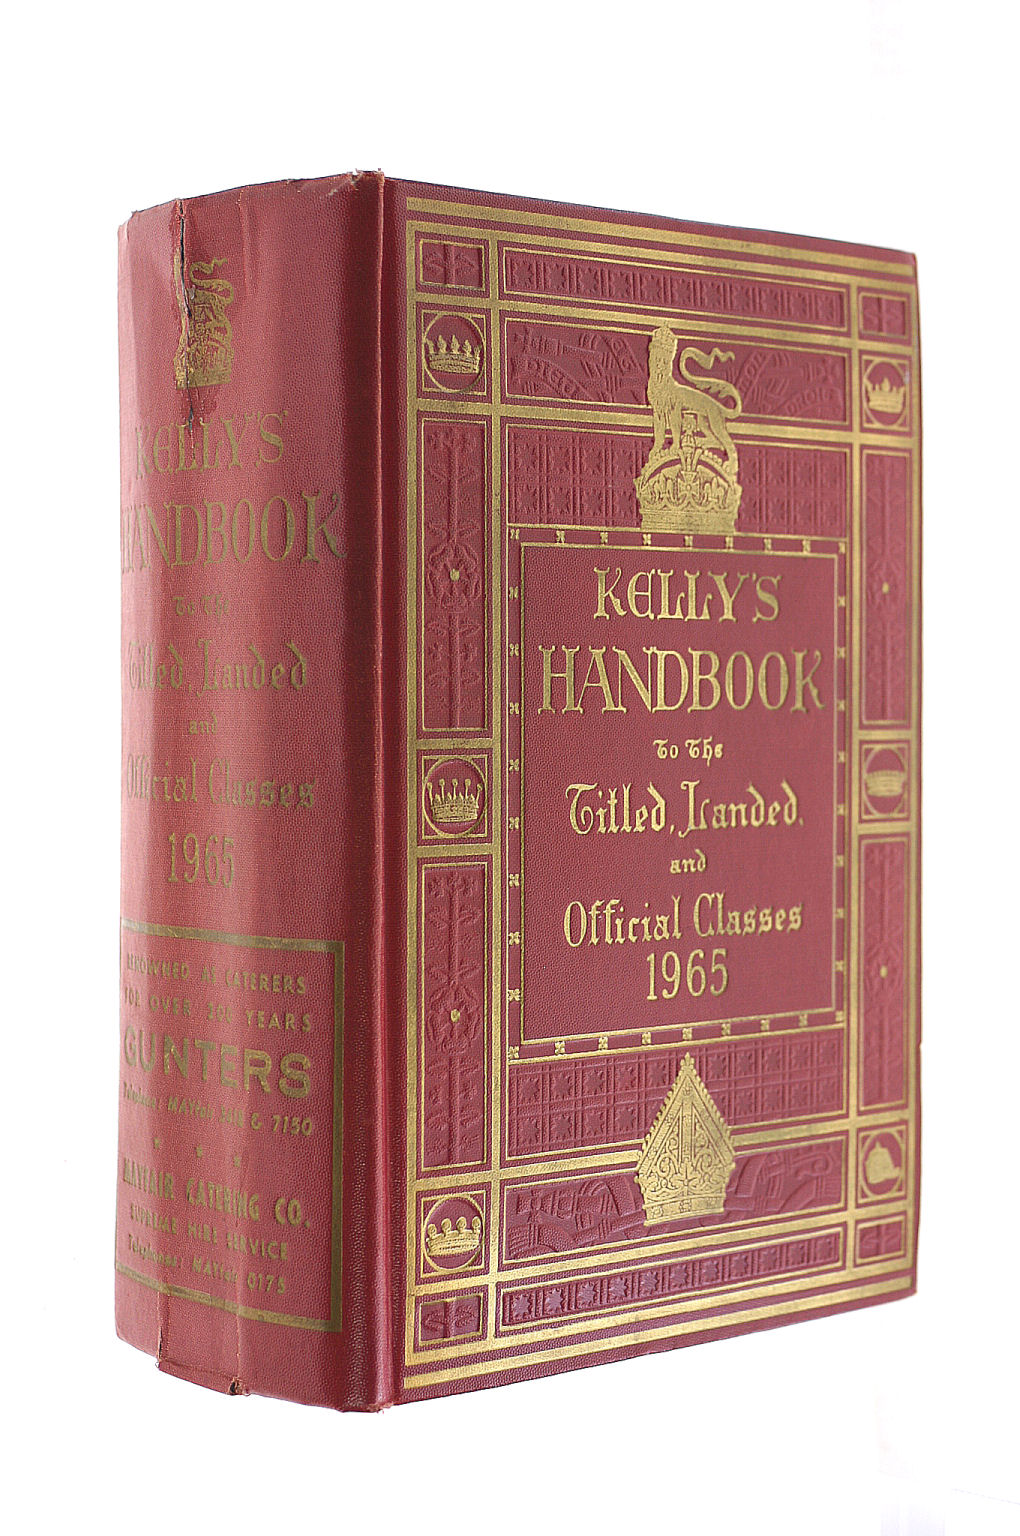 ANON - Kelly's Handbook to the Titled, Landed and Official Classes. 1965